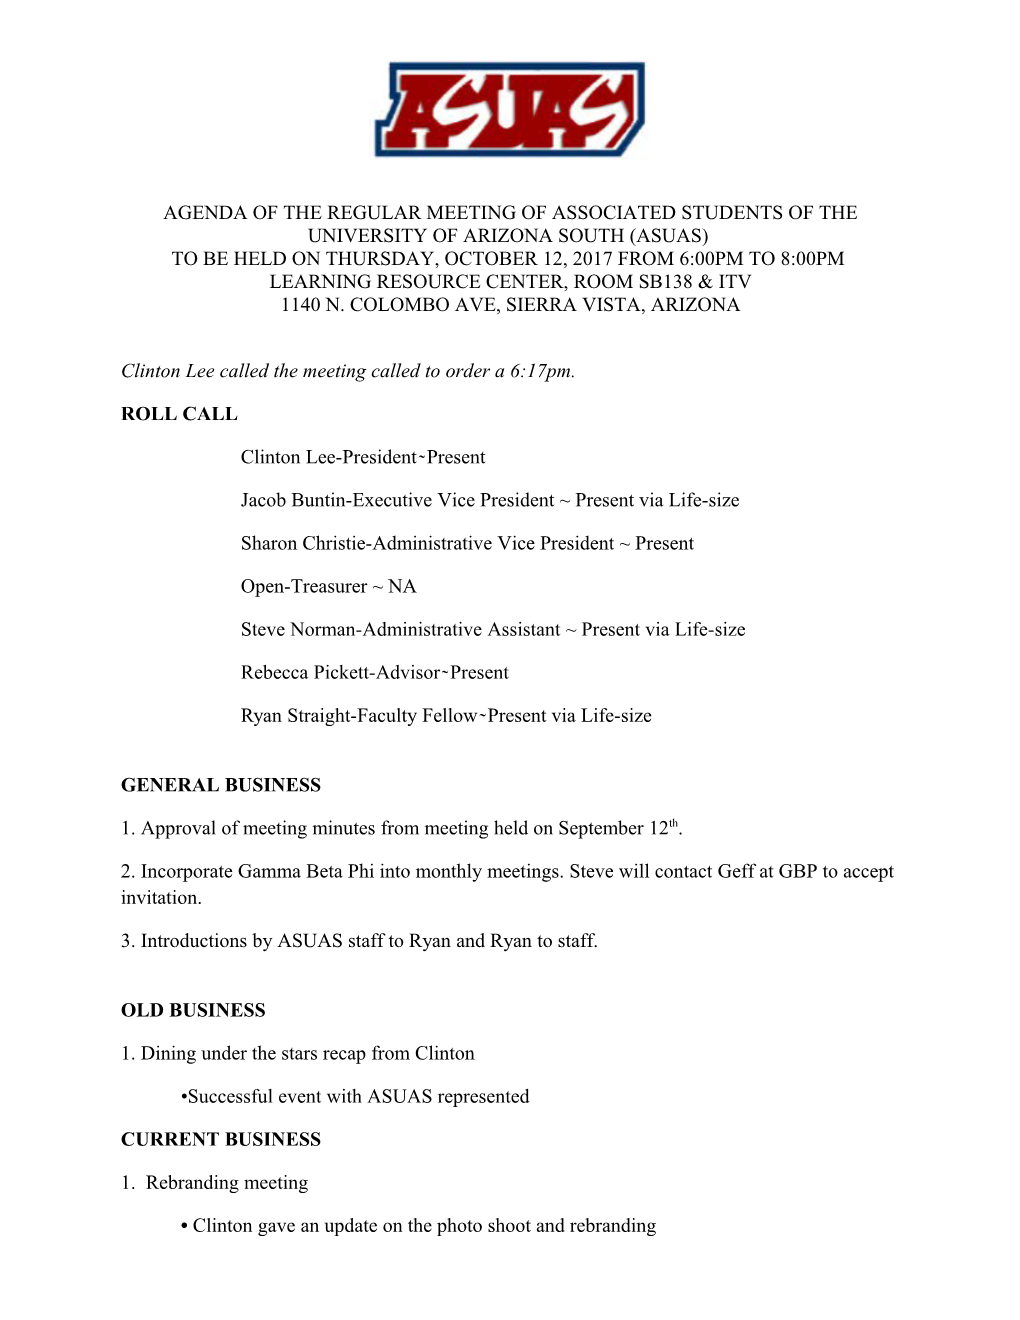 Agenda of the Regular Meeting of Associated Students of the University of Arizona South (Asuas)